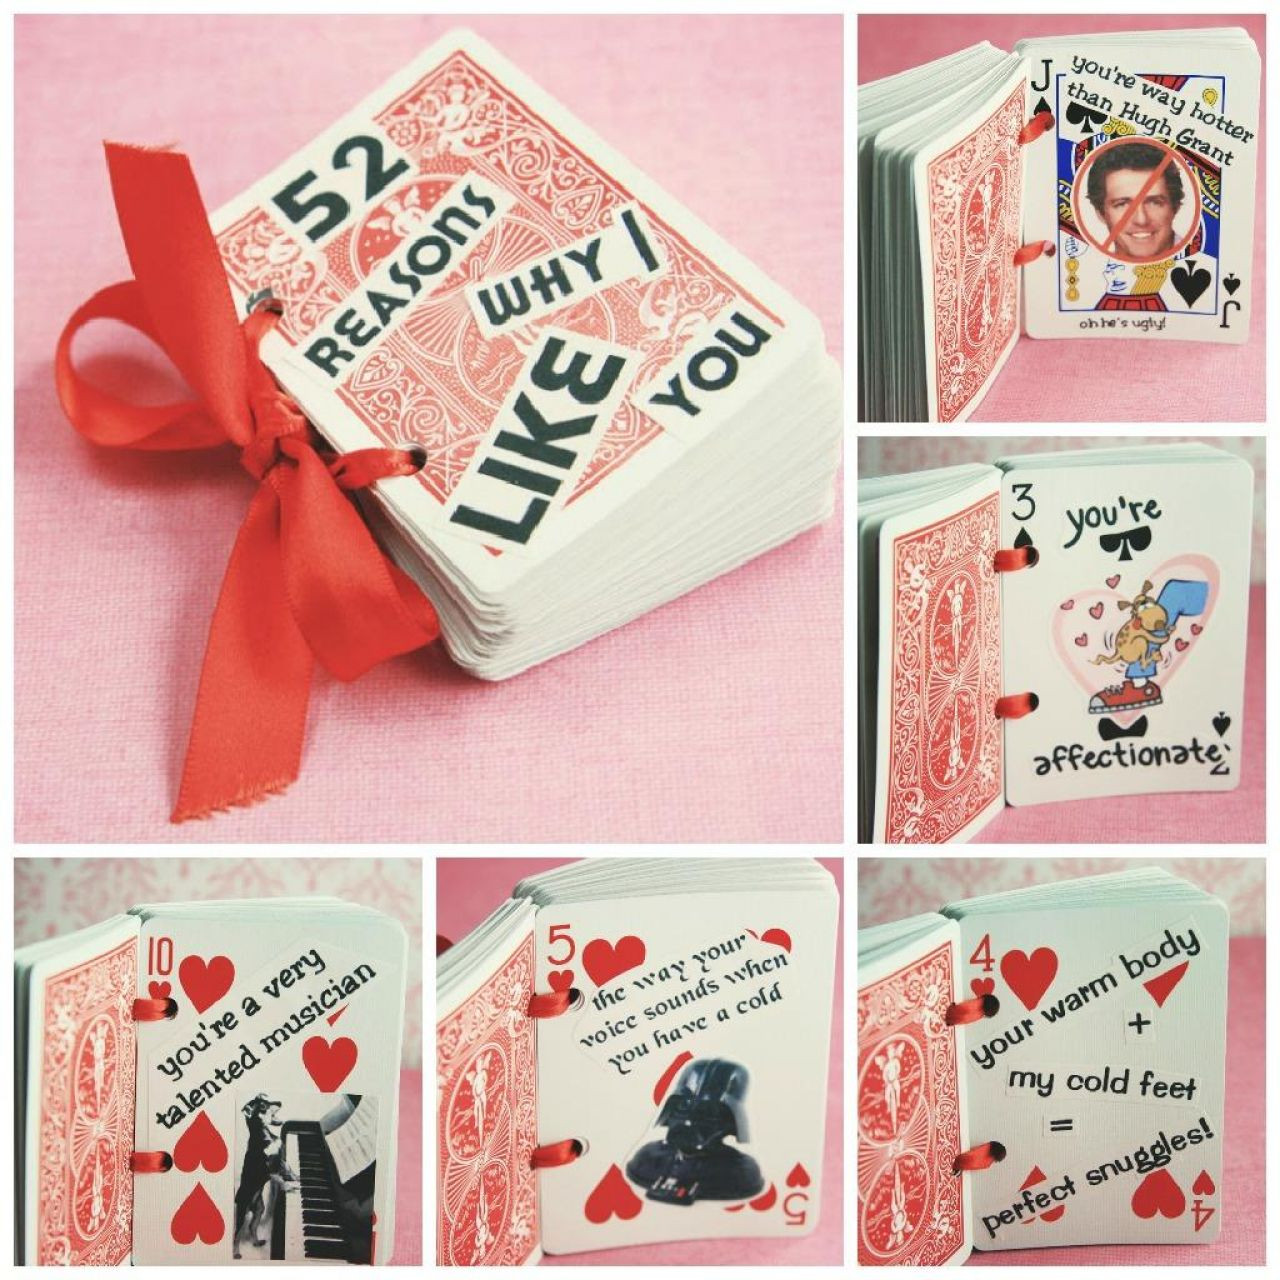 Creative Valentine Day Gift Ideas For Boyfriend
 24 LOVELY VALENTINE S DAY GIFTS FOR YOUR BOYFRIEND